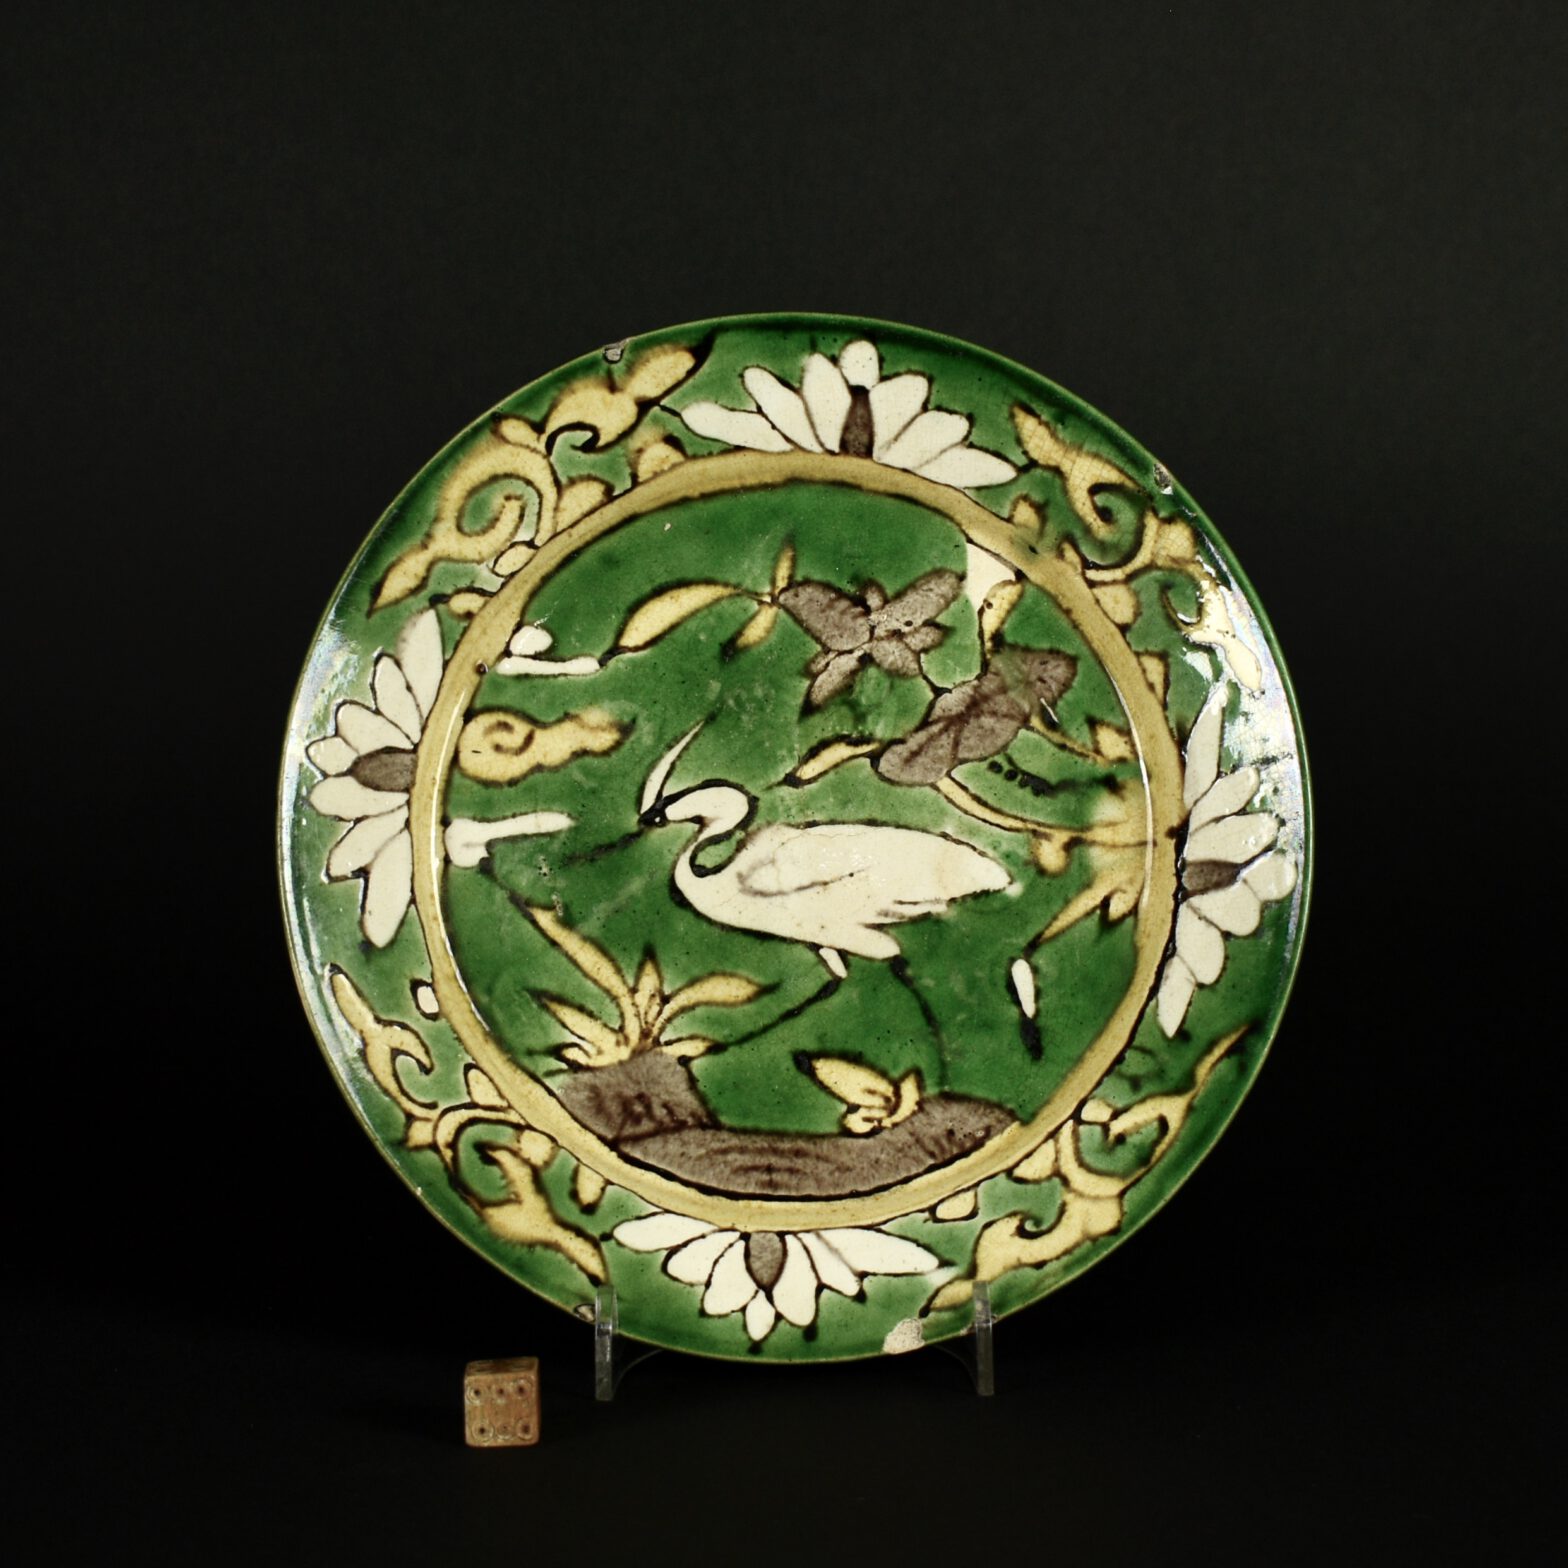 A Ming Lead-Glazed Pottery Dish From the Collection of Soame Jenyns - Robert McPherson Antiques - 25859